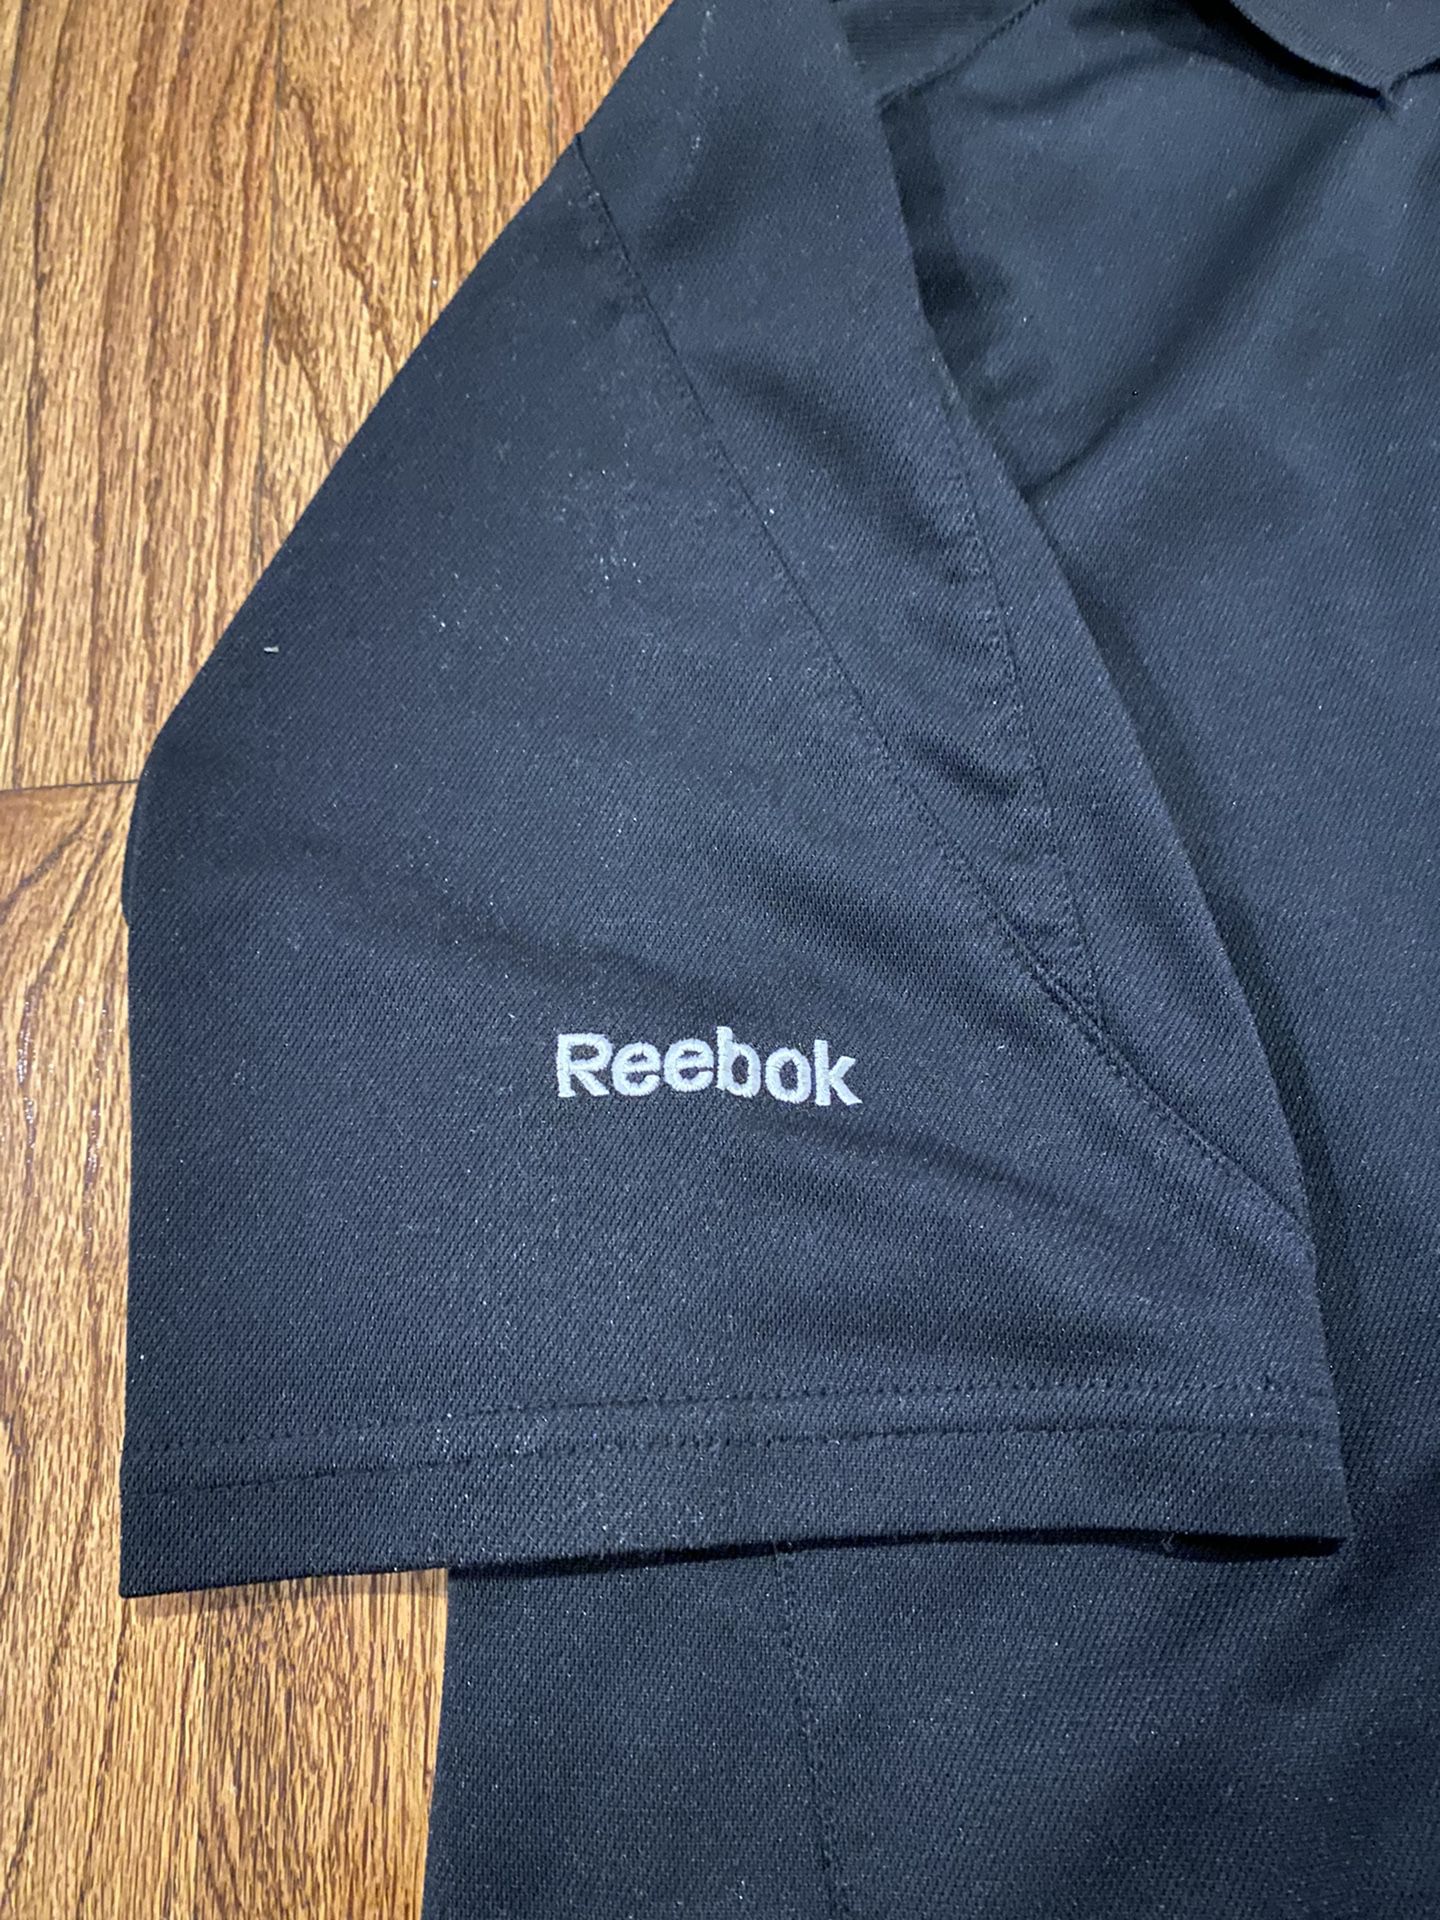 Reebok Toronto Maple Leaf Long Sleeve Shirt for Sale in Staten Island, NY -  OfferUp